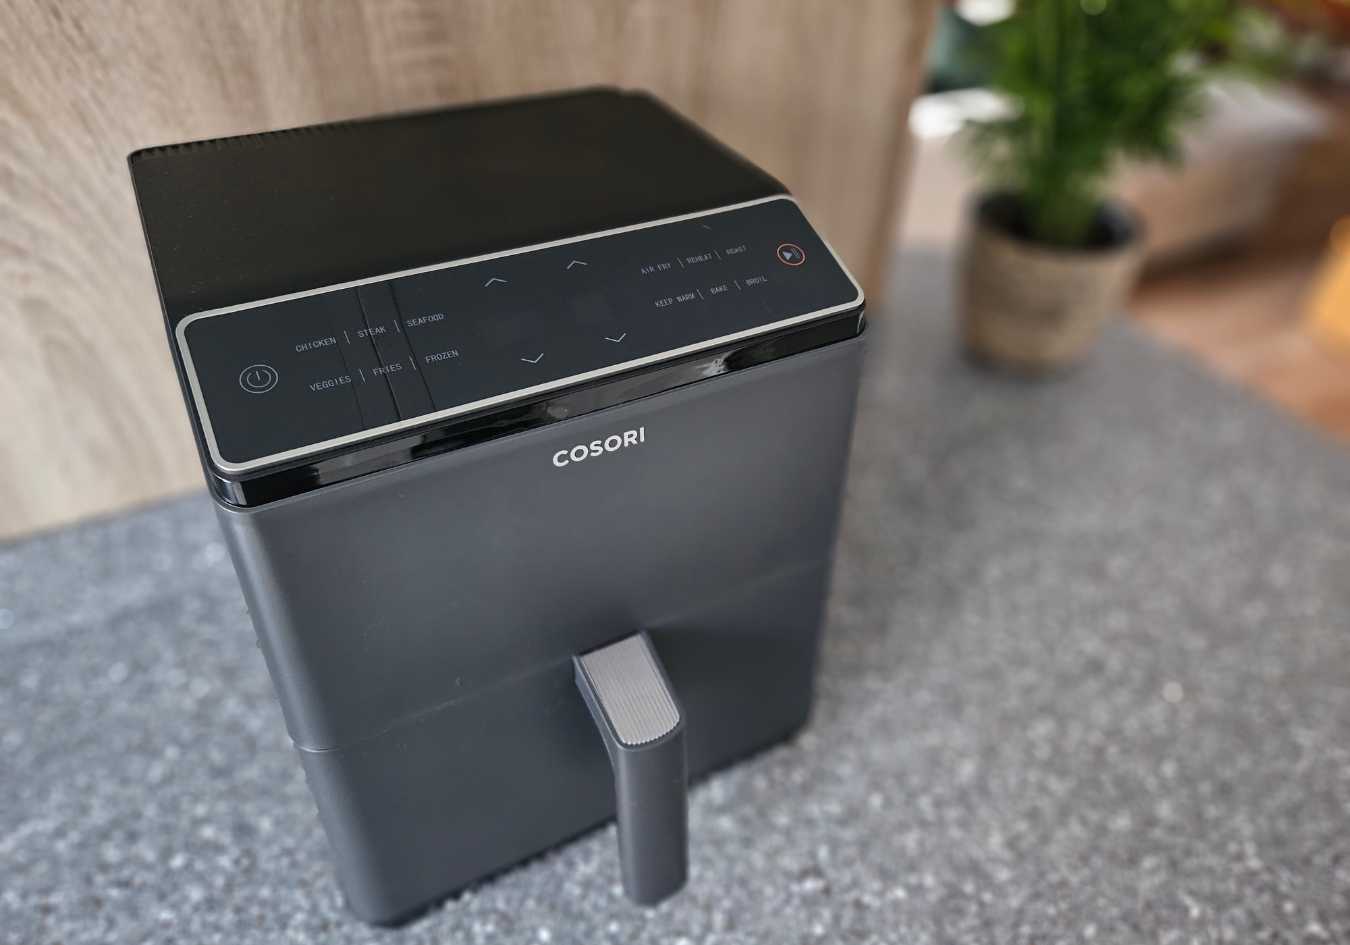 Cosori air fryer review: The best air fryer?